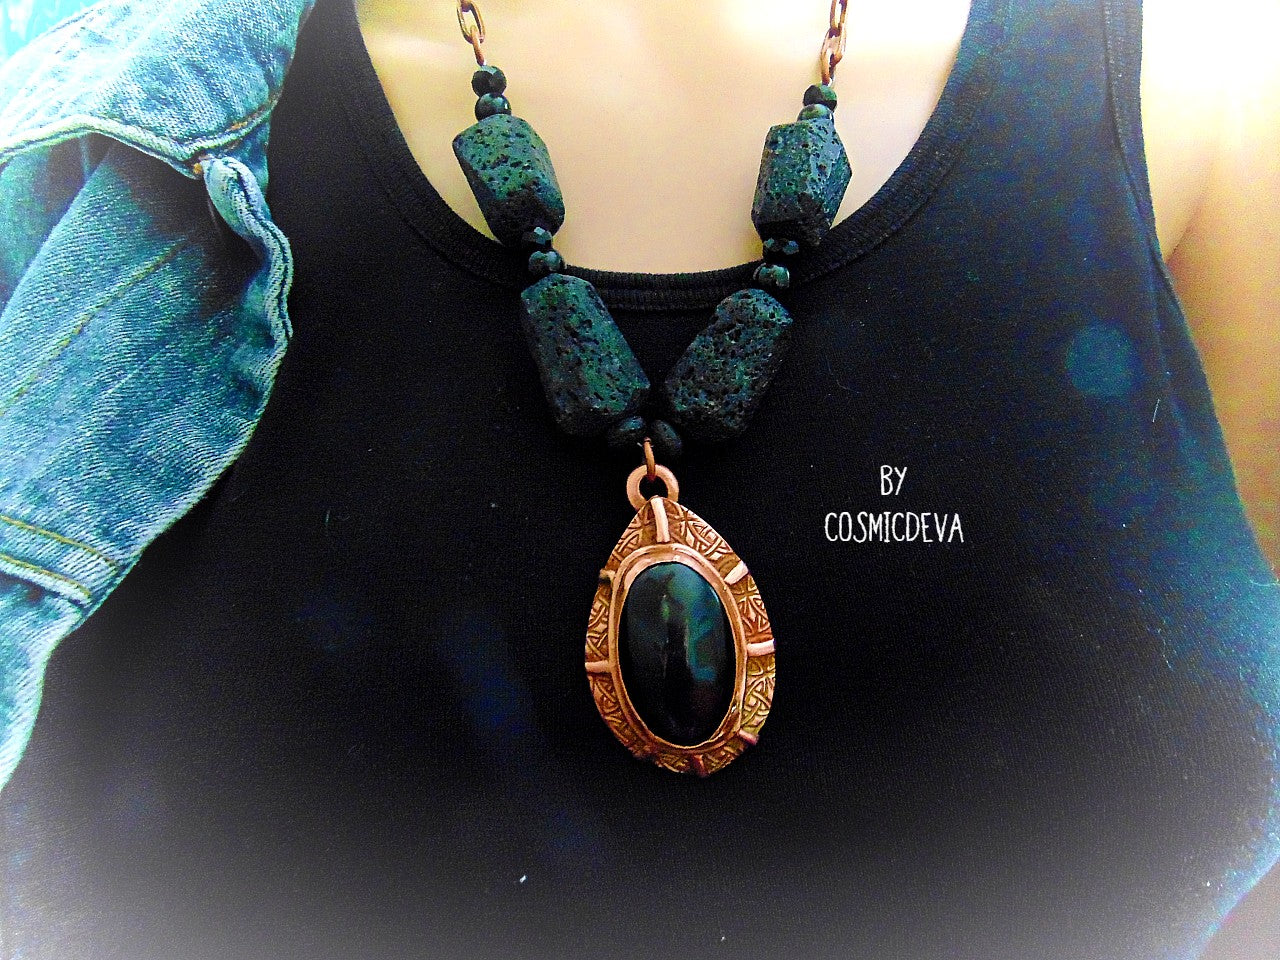 Beautiful rustic solid copper statement necklace with large and very dark black rainbow obsidian gemstone bezel setting as a focal point. The pendant was completely hand formed from solid copper. The statement necklace is made of chunky natural black lava stones with a 12.6mm copper draw cable chain. It has a nice texture and was annealed and polished with microcrystalline wax (Renaissance wax)